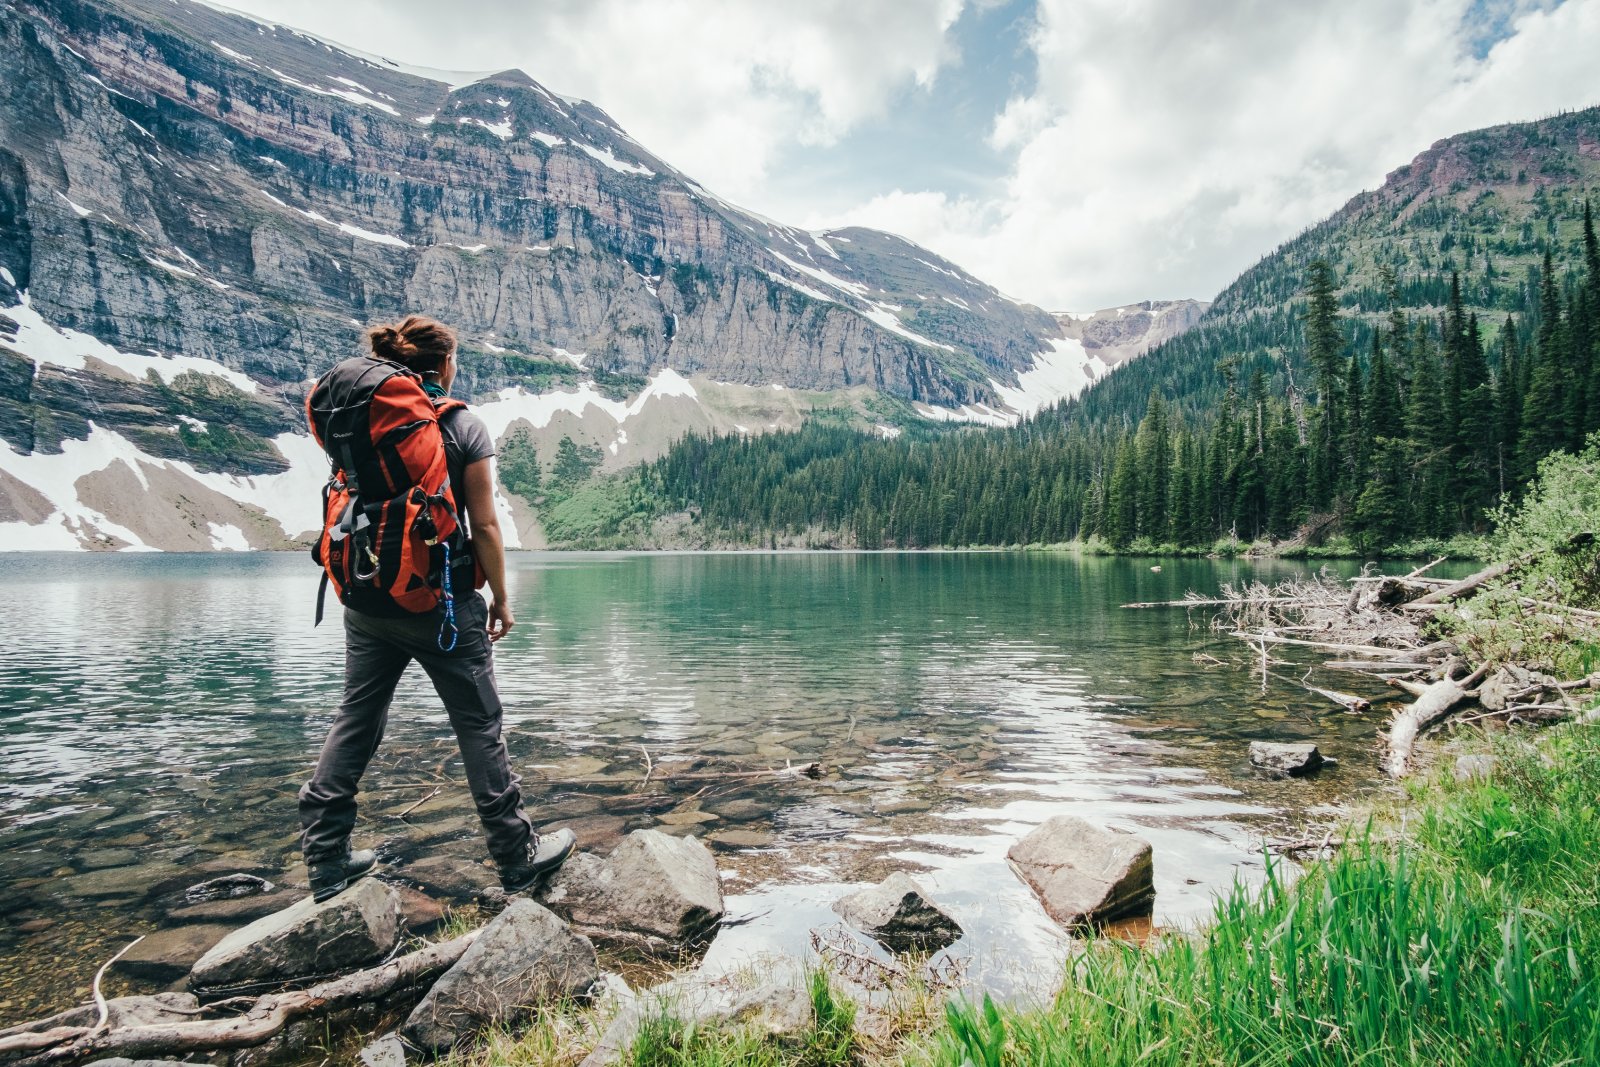 <p class="wp-caption-text">Image Credit: Shutterstock / attilio pregnolato</p>  <p><span>Each of these lakes, with their depth and unique offerings, invites visitors to explore the natural beauty and myriad activities available across the United States. Whether you’re drawn to the tranquility of a mountain lake or the adventure of the great outdoors, these lakes promise unforgettable experiences.</span></p>